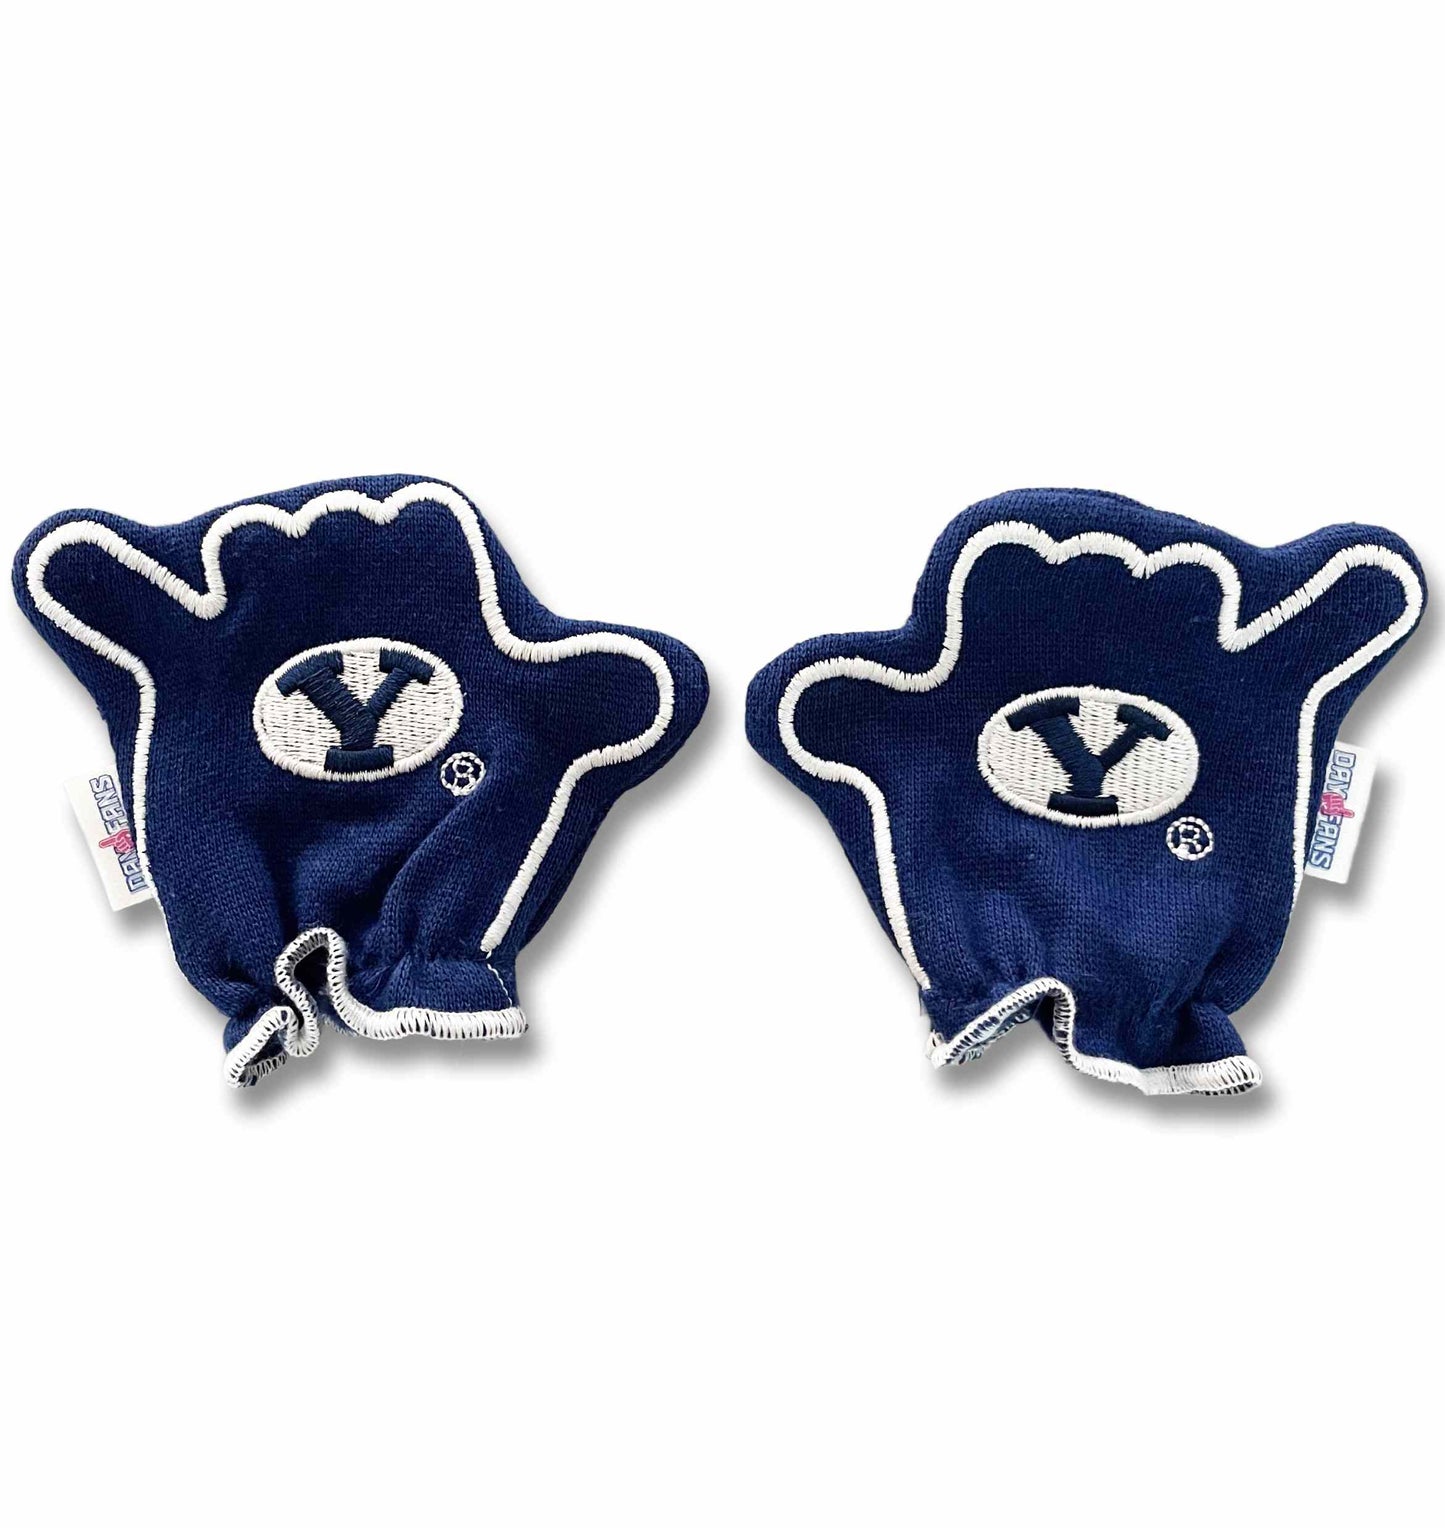 BYU Go Cougs FanMitts Baby Mittens Navy Blue Back Pair